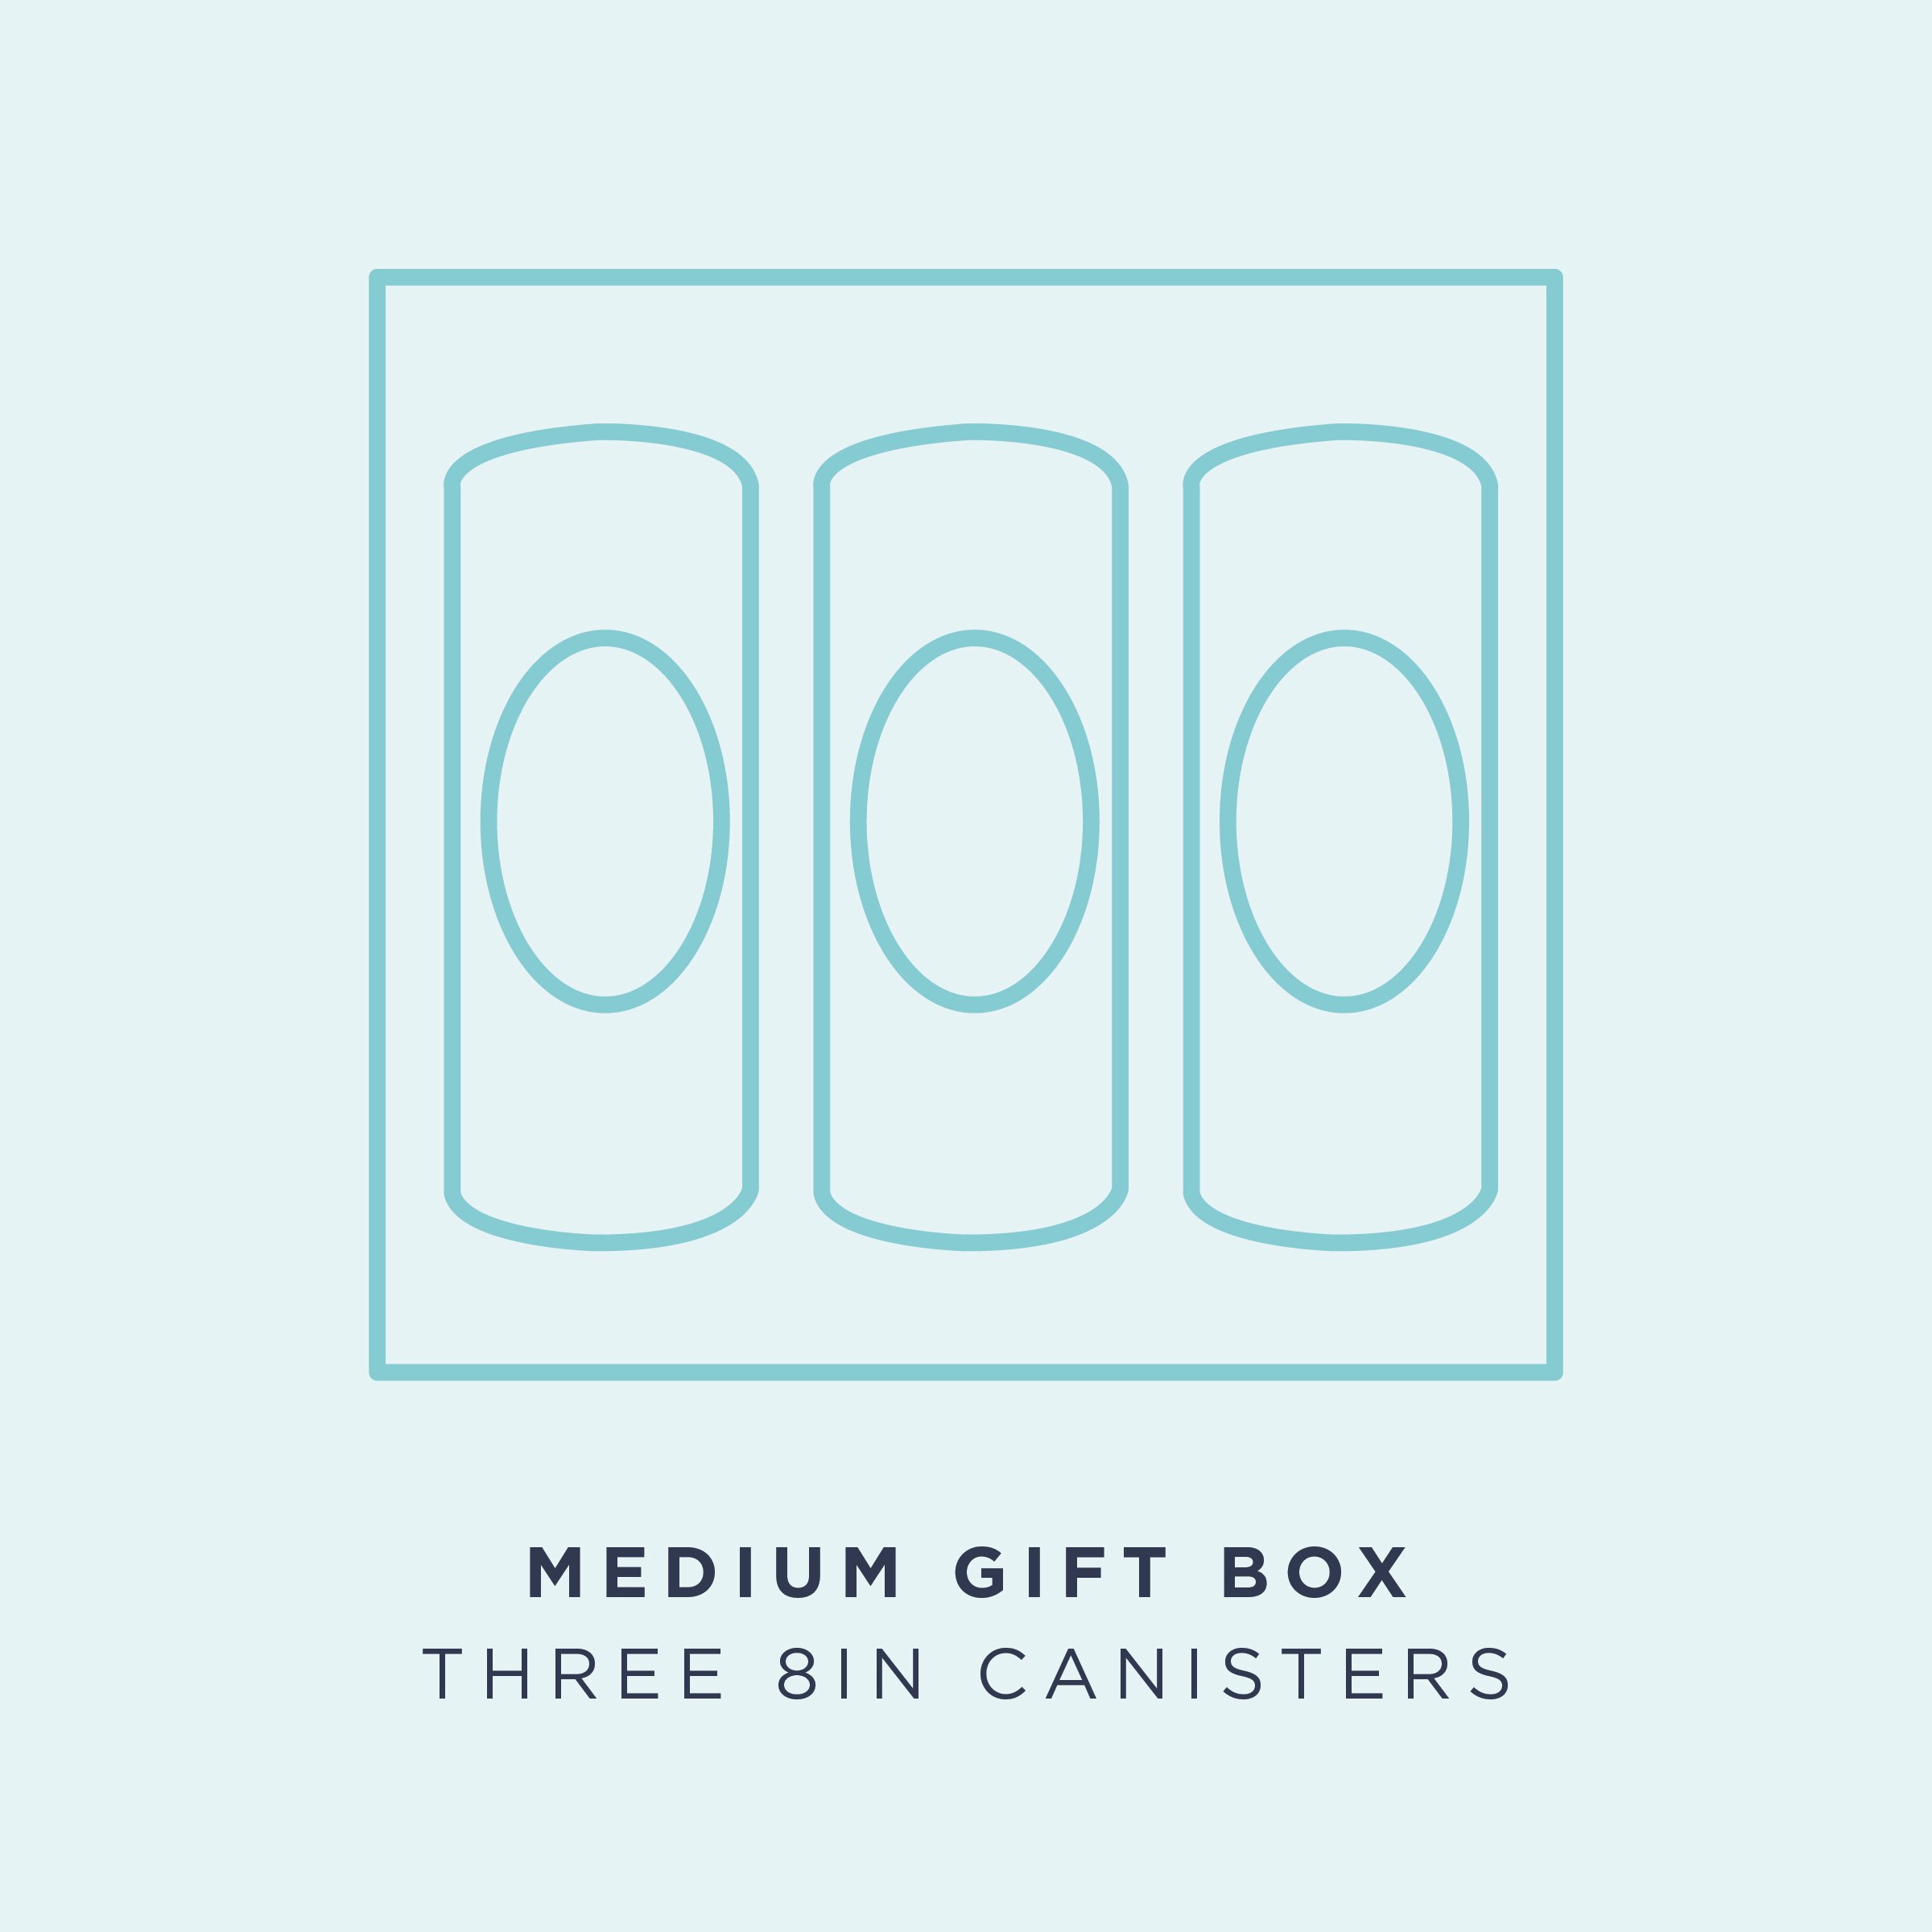 Configurations-GiftBoxes-14.jpg